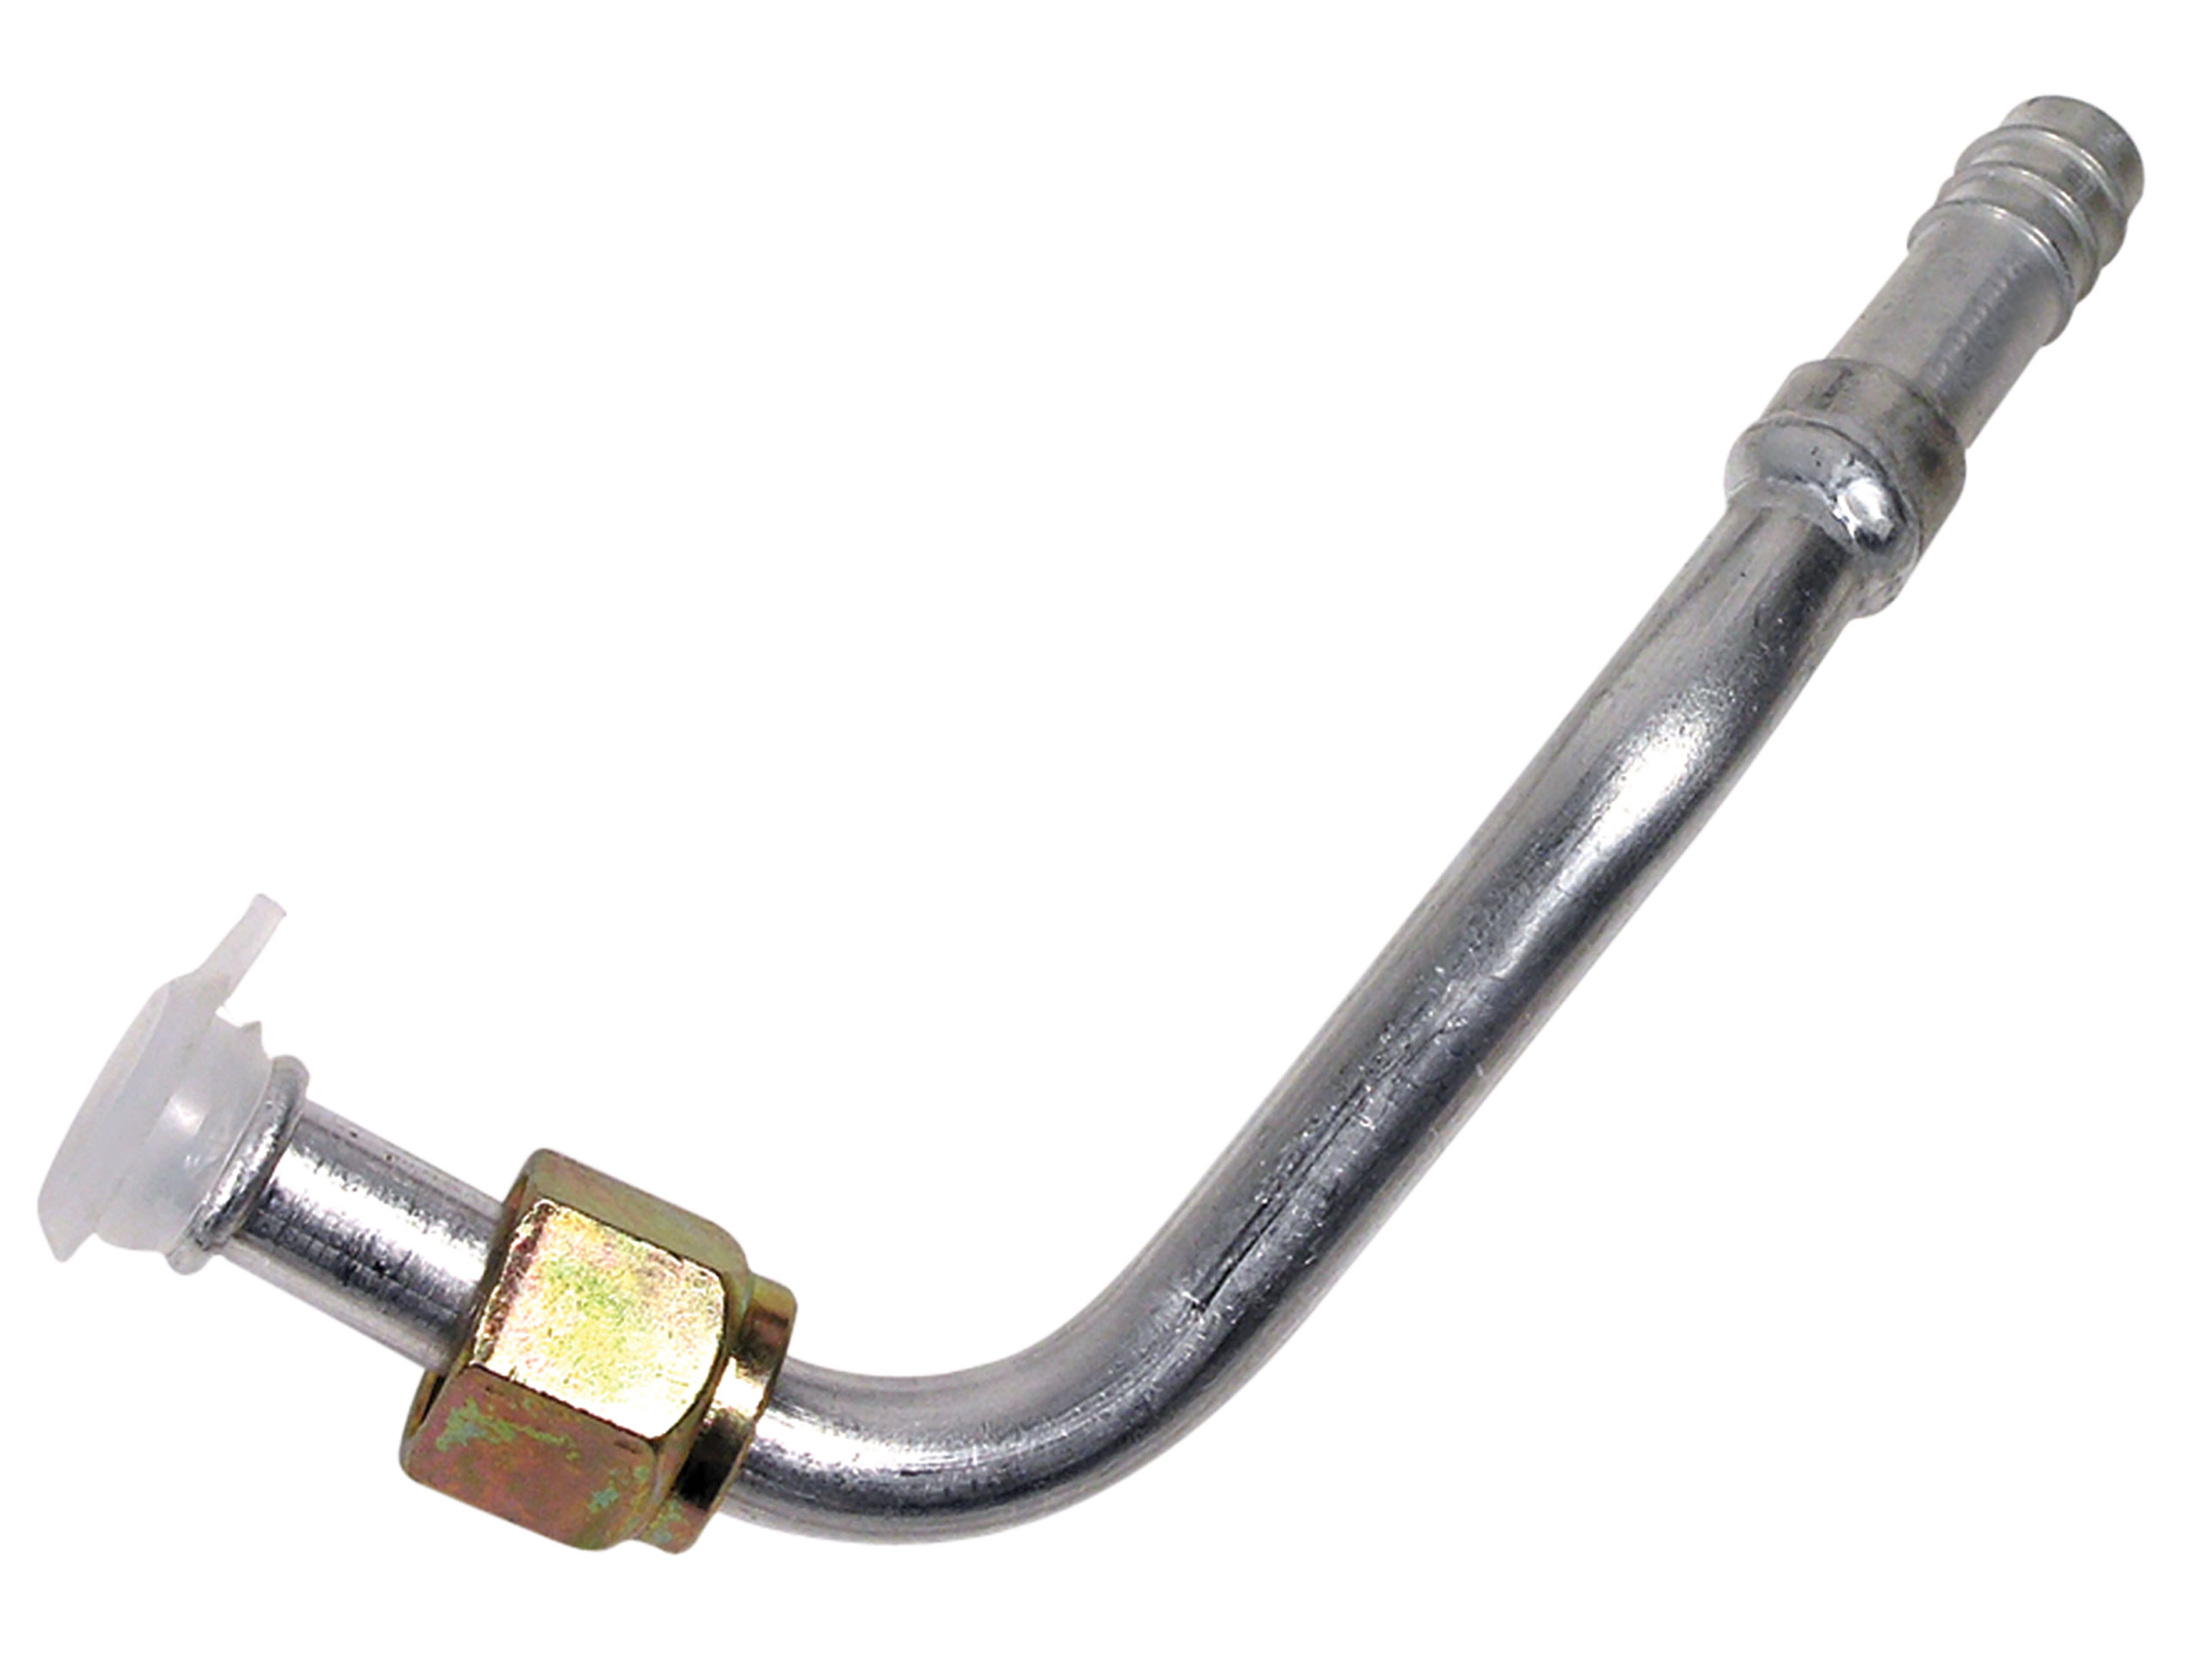 C2 1966-1967 Chevrolet Corvette Air Conditioning Condenser To Hose Fitting. Late 66 - Old Air Products